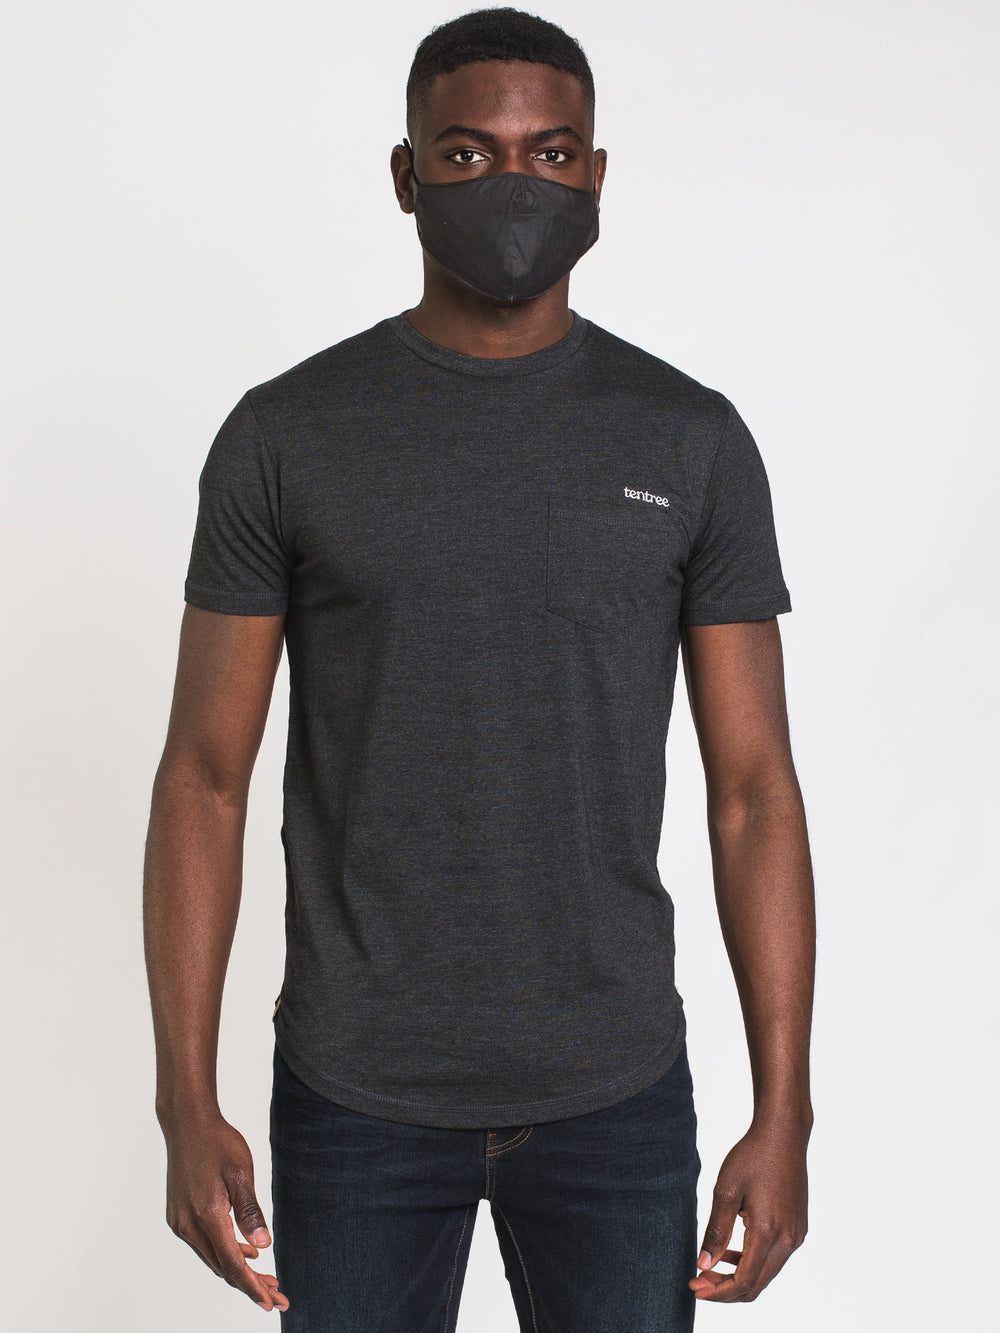 TENTREE EMBROIDERED POCKET T-SHIRT  - CLEARANCE